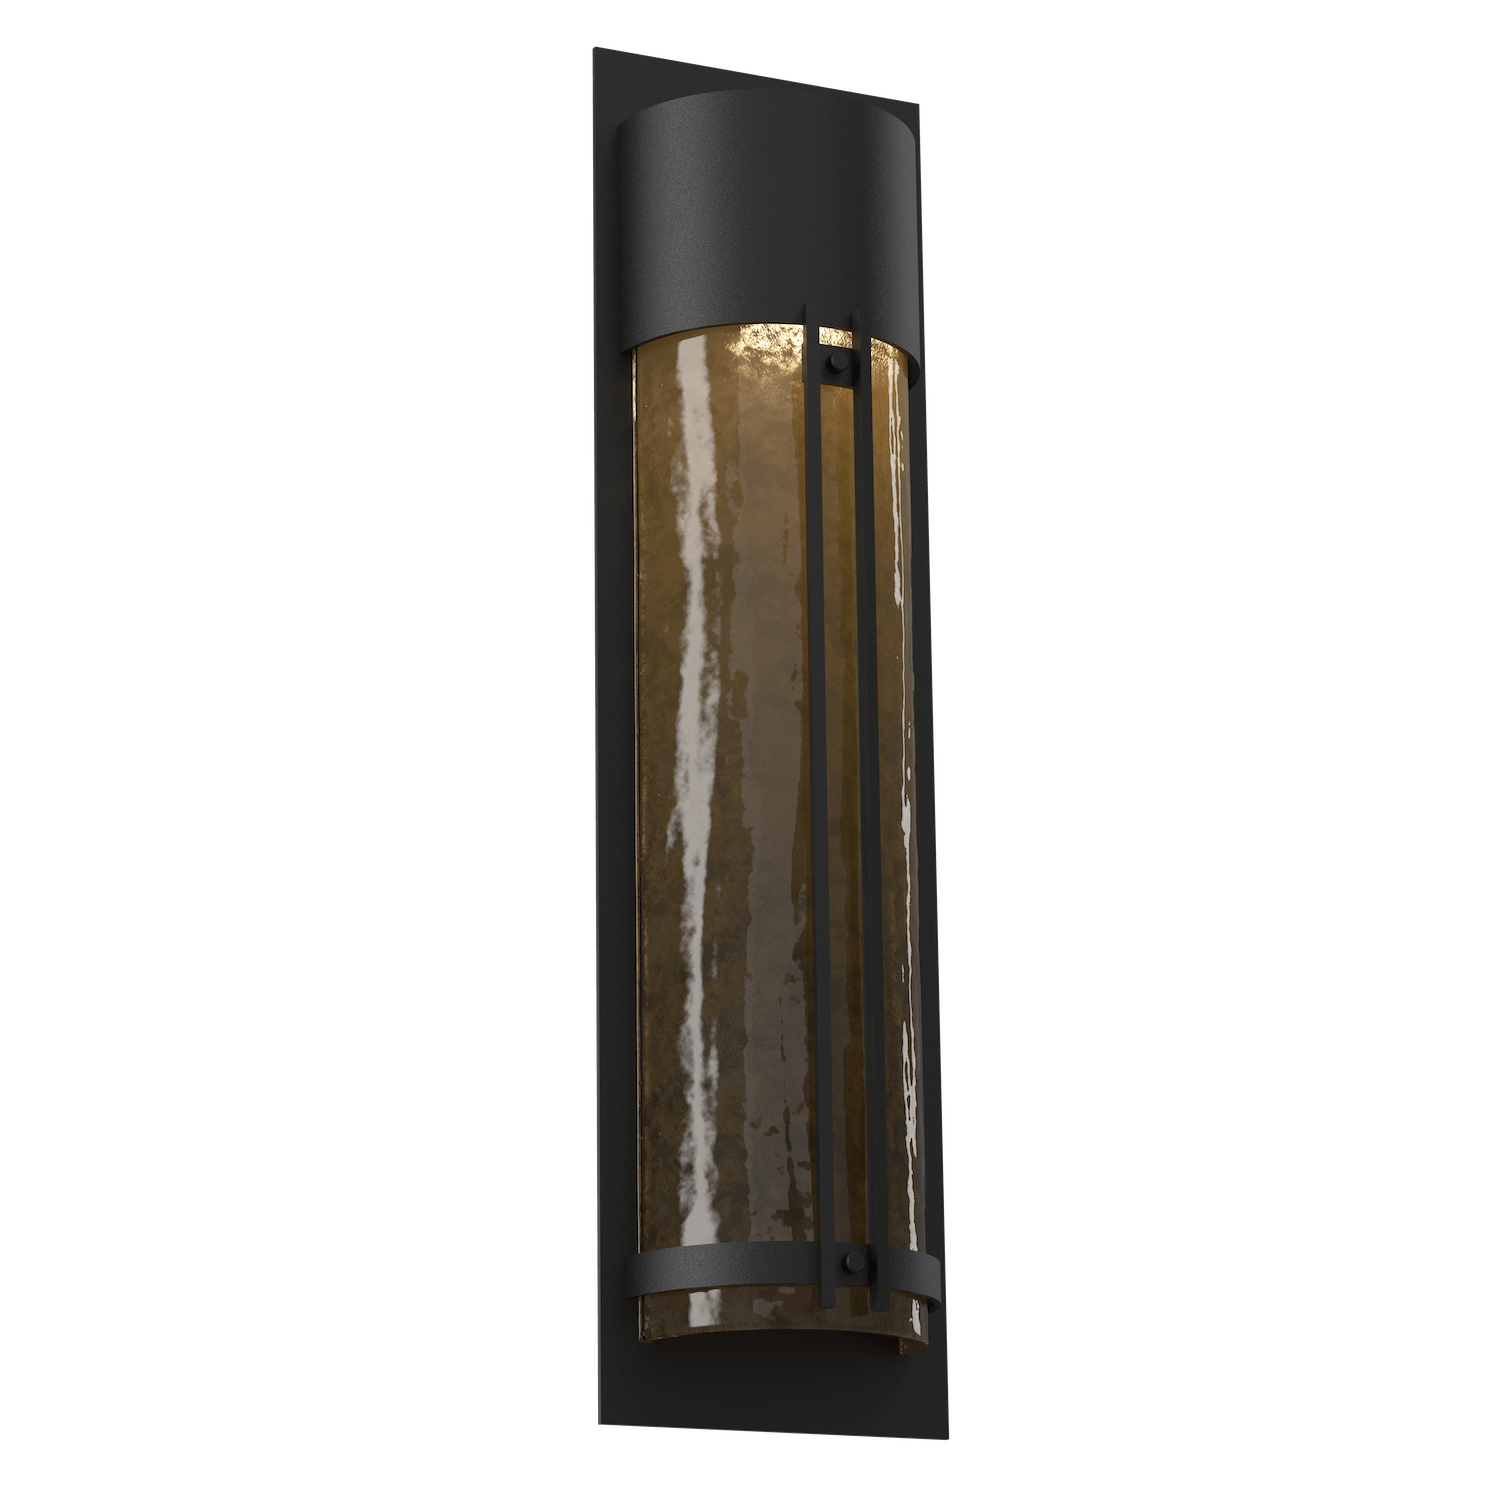 ODB0054-26-TB-BG-Hammerton-Studio-26-inch-outdoor-sconce-with-half-round-bronze-granite-glass-cover-with-textured-black-finish-and-LED-lamping